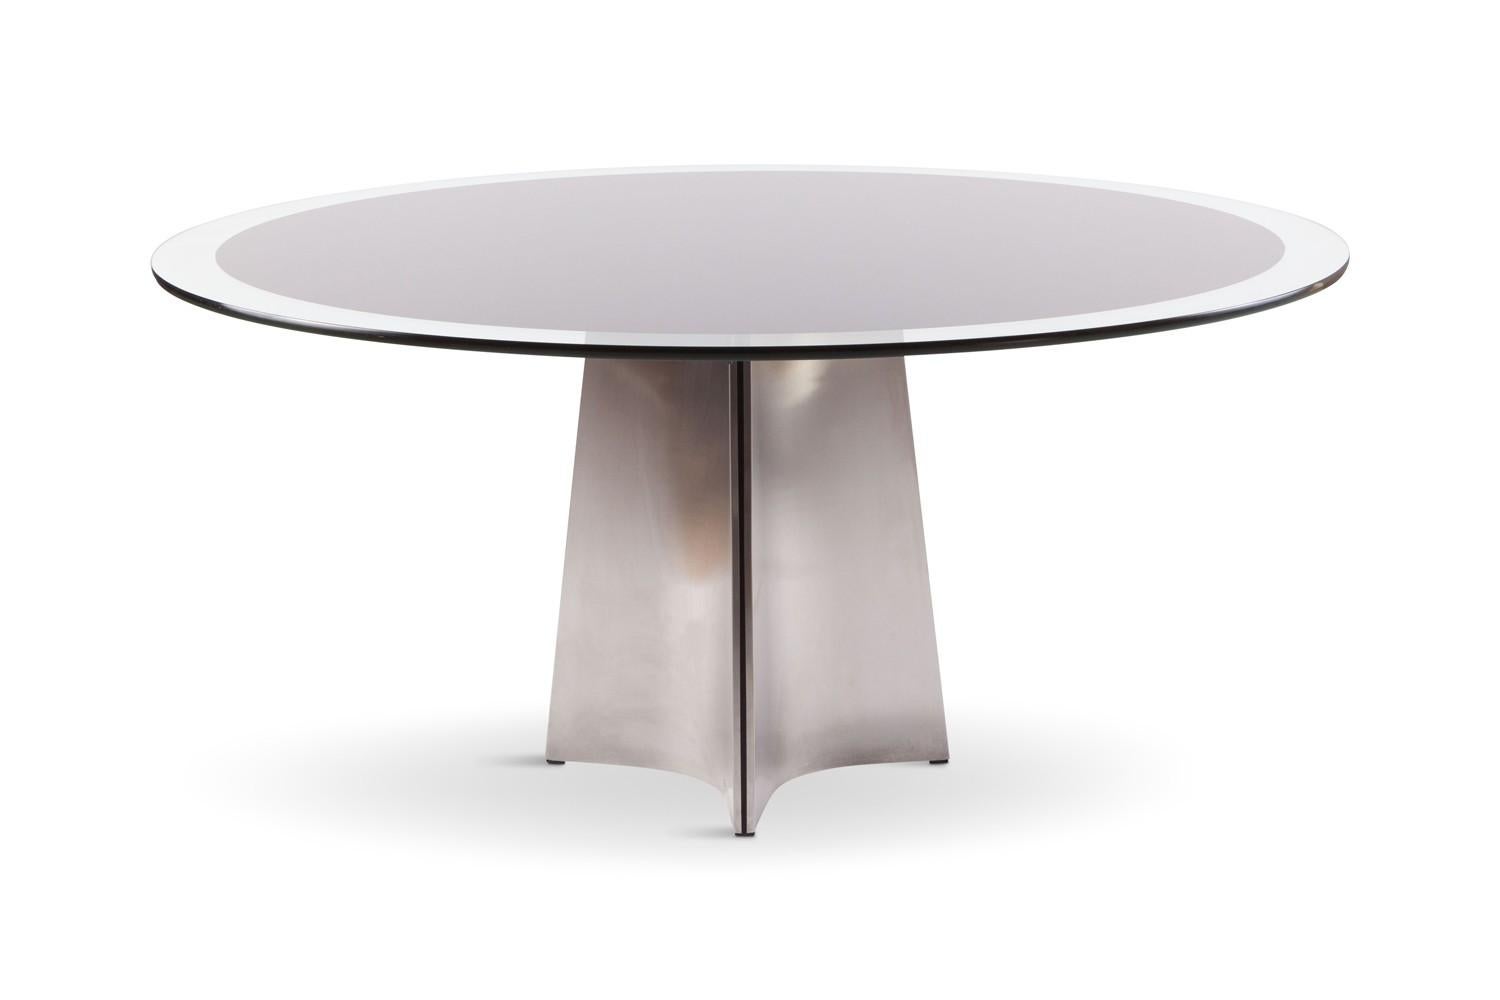 This extravagant contemporary dining table is perfect in every way, and. Curved in toward the table's center, this iconic piece by Italian Modernist Luigi Saccardo for French firm Maison Jansen in the 1970s is made from concave bendable sleek